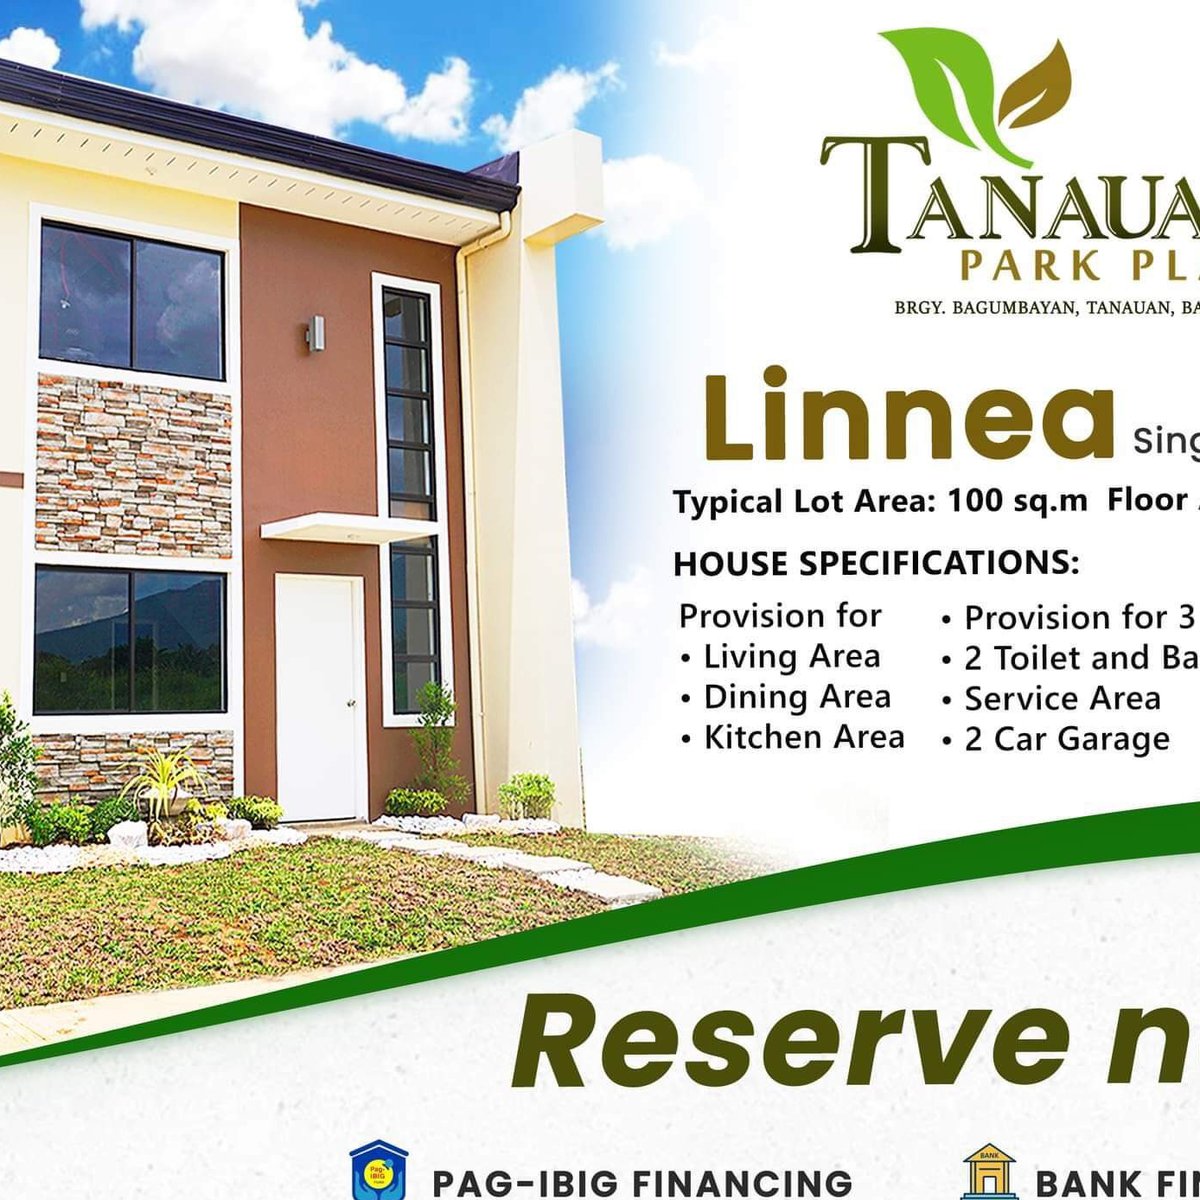 3 bedroom single attached House for sale in Tanauan Batangas